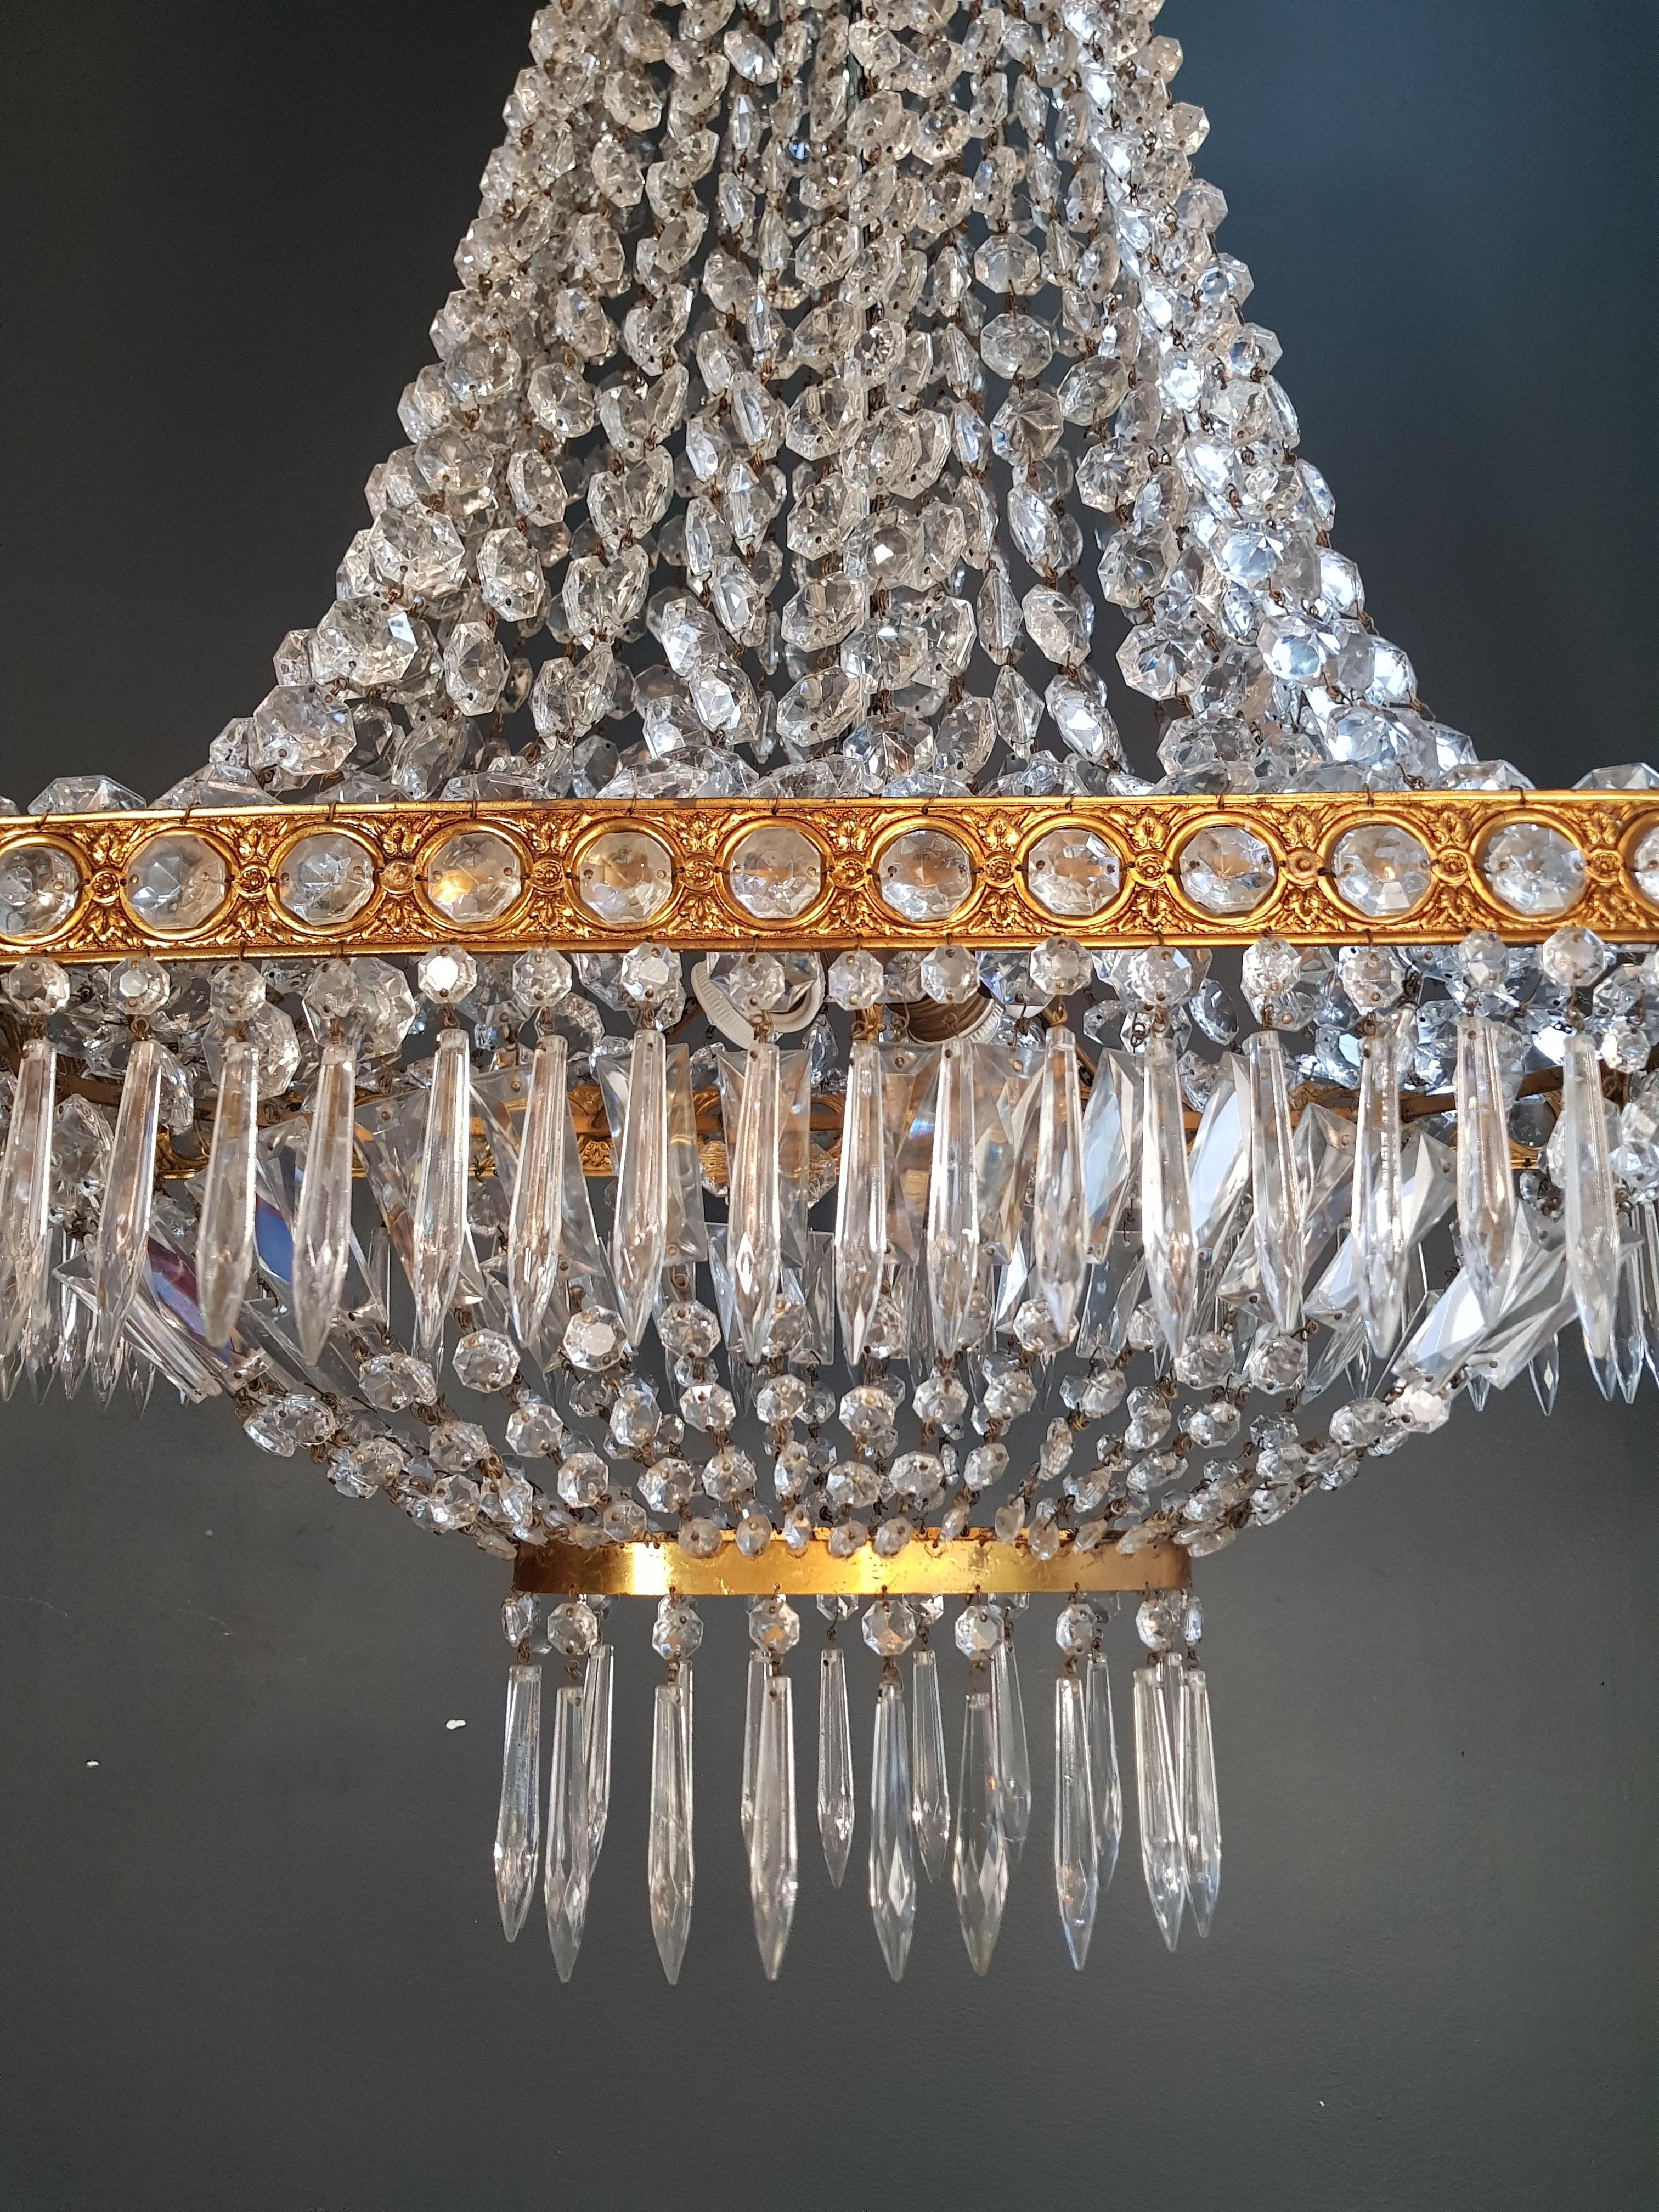 Original preserved chandelier. Cabling and sockets completely renewed. Crystal hand knotted
Measures: Total height: 120 cm, height without chain: 88 cm, diameter 60 x 30 cm, weight (approximately) 10kg.

Number of lights: 4-light bulb sockets: